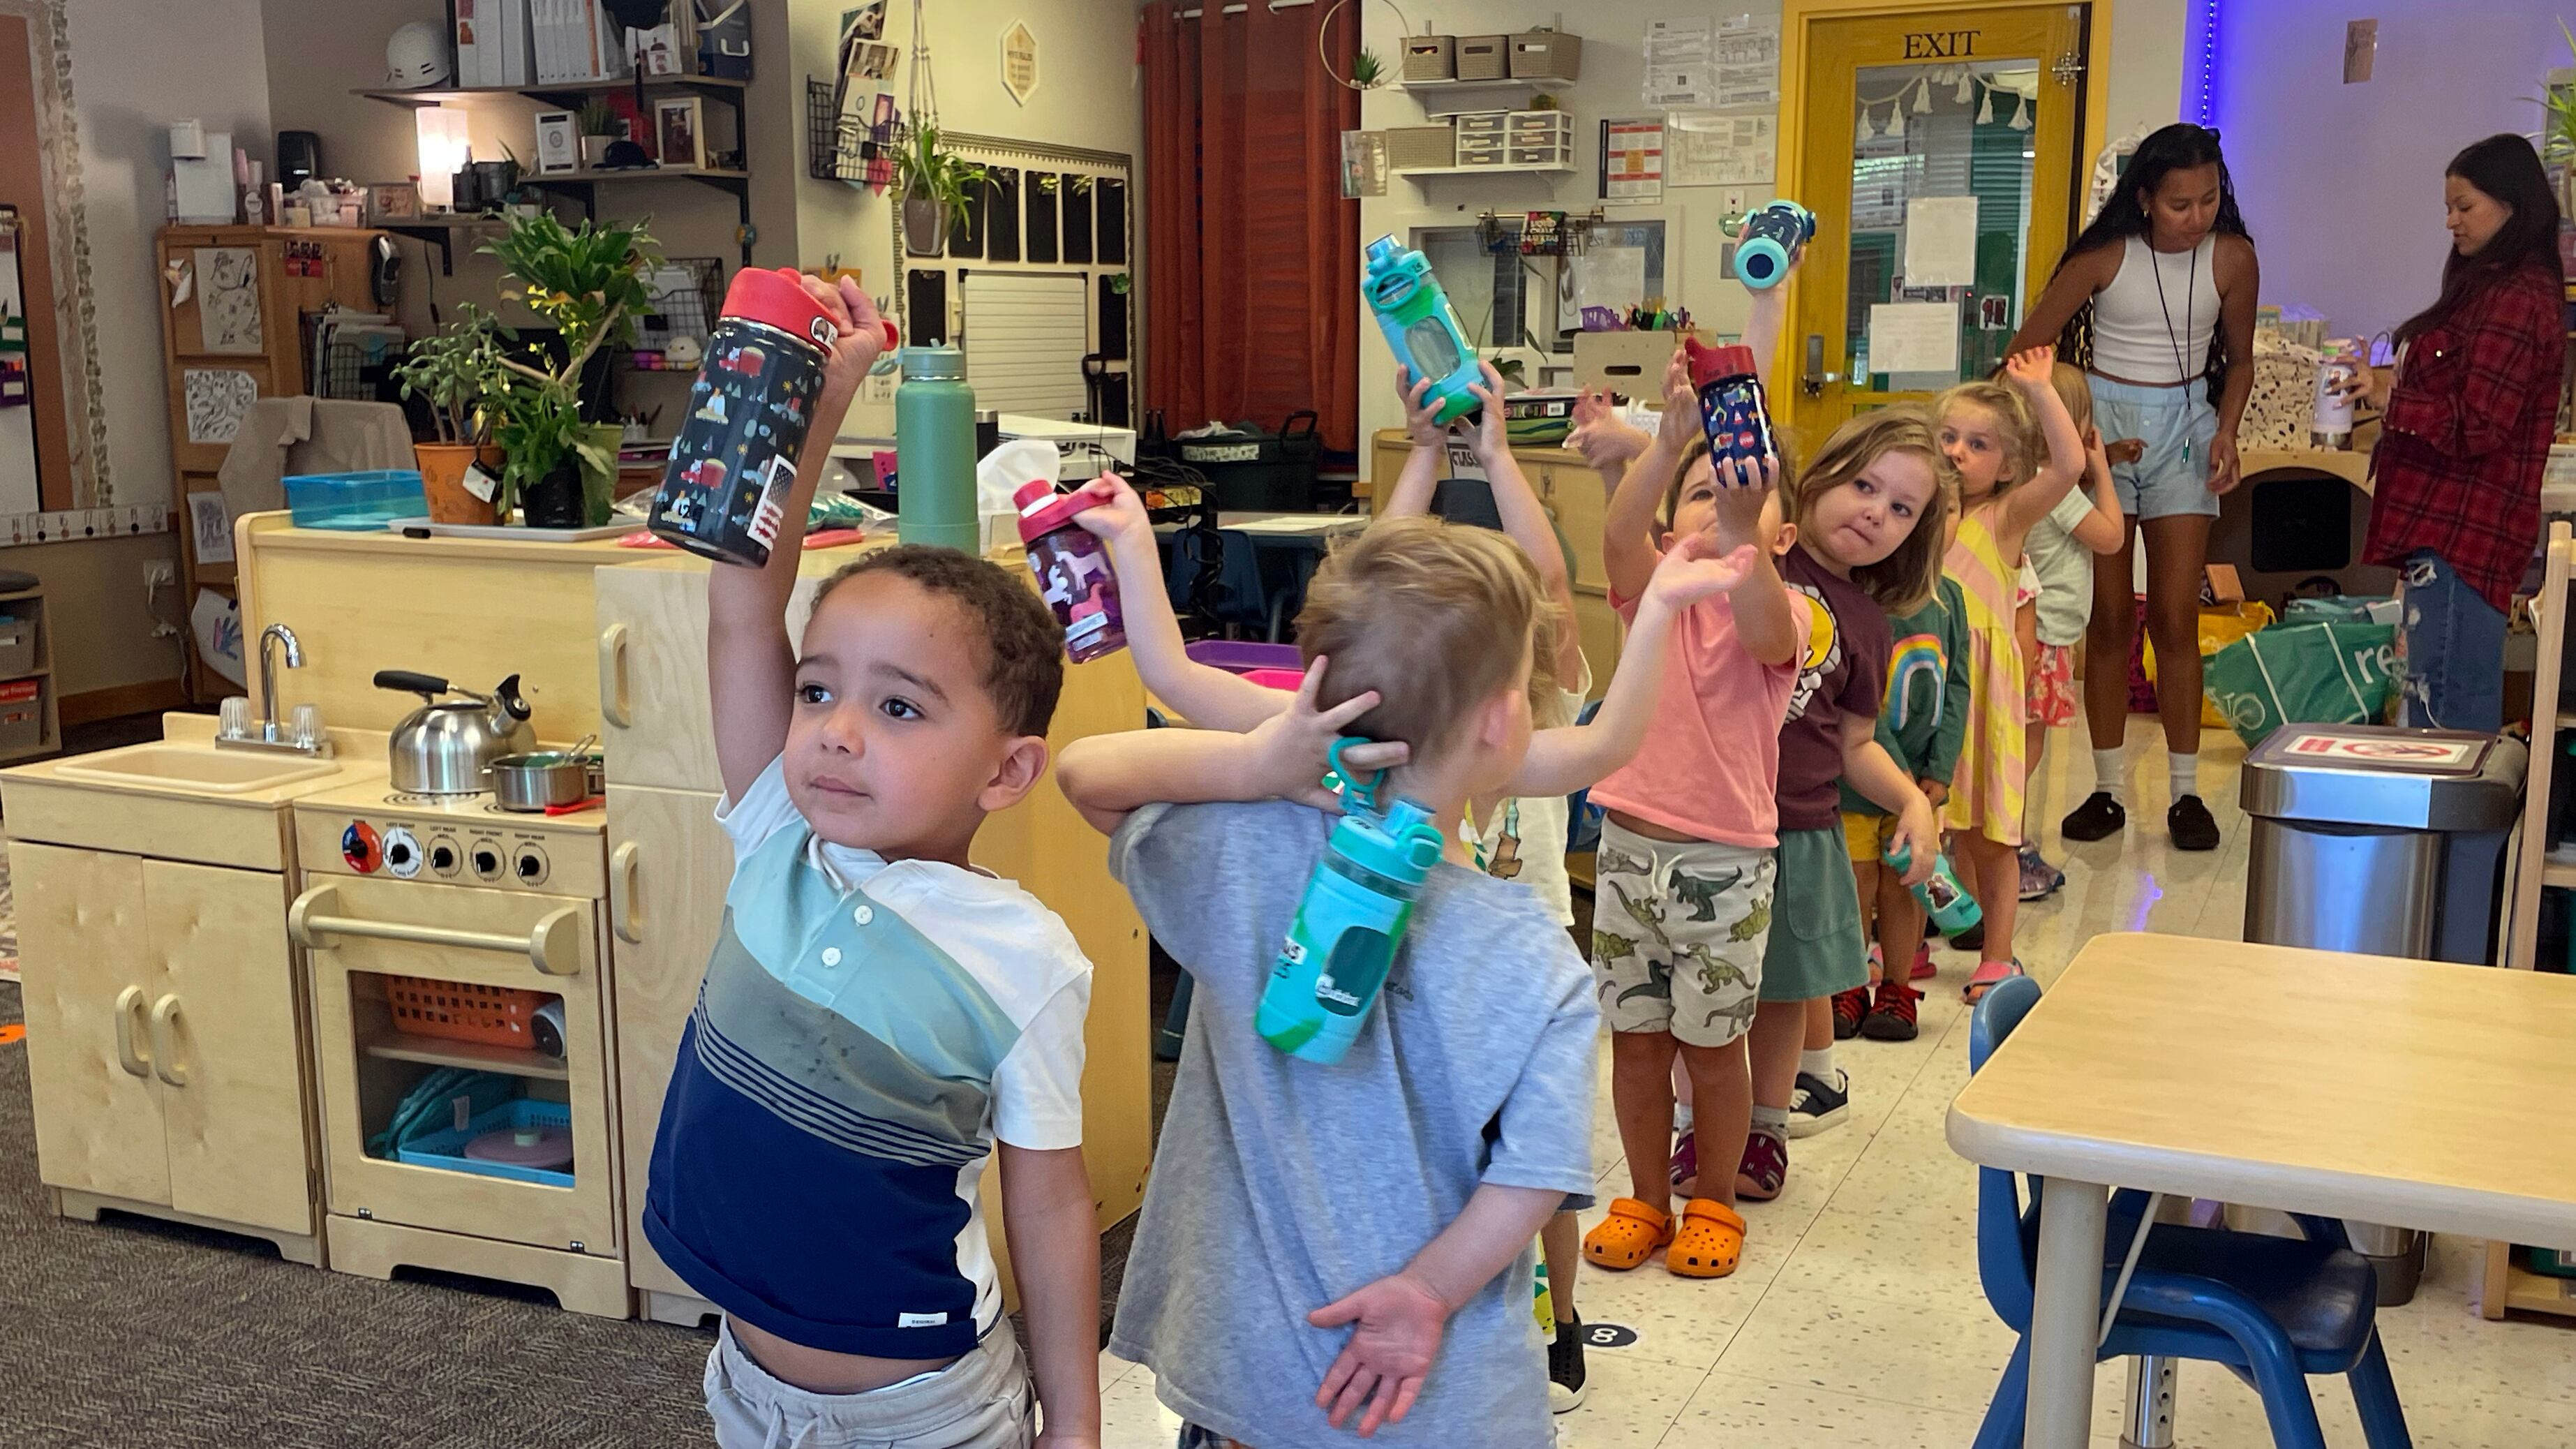 Preschool students in a line hold water bottles over their heads.